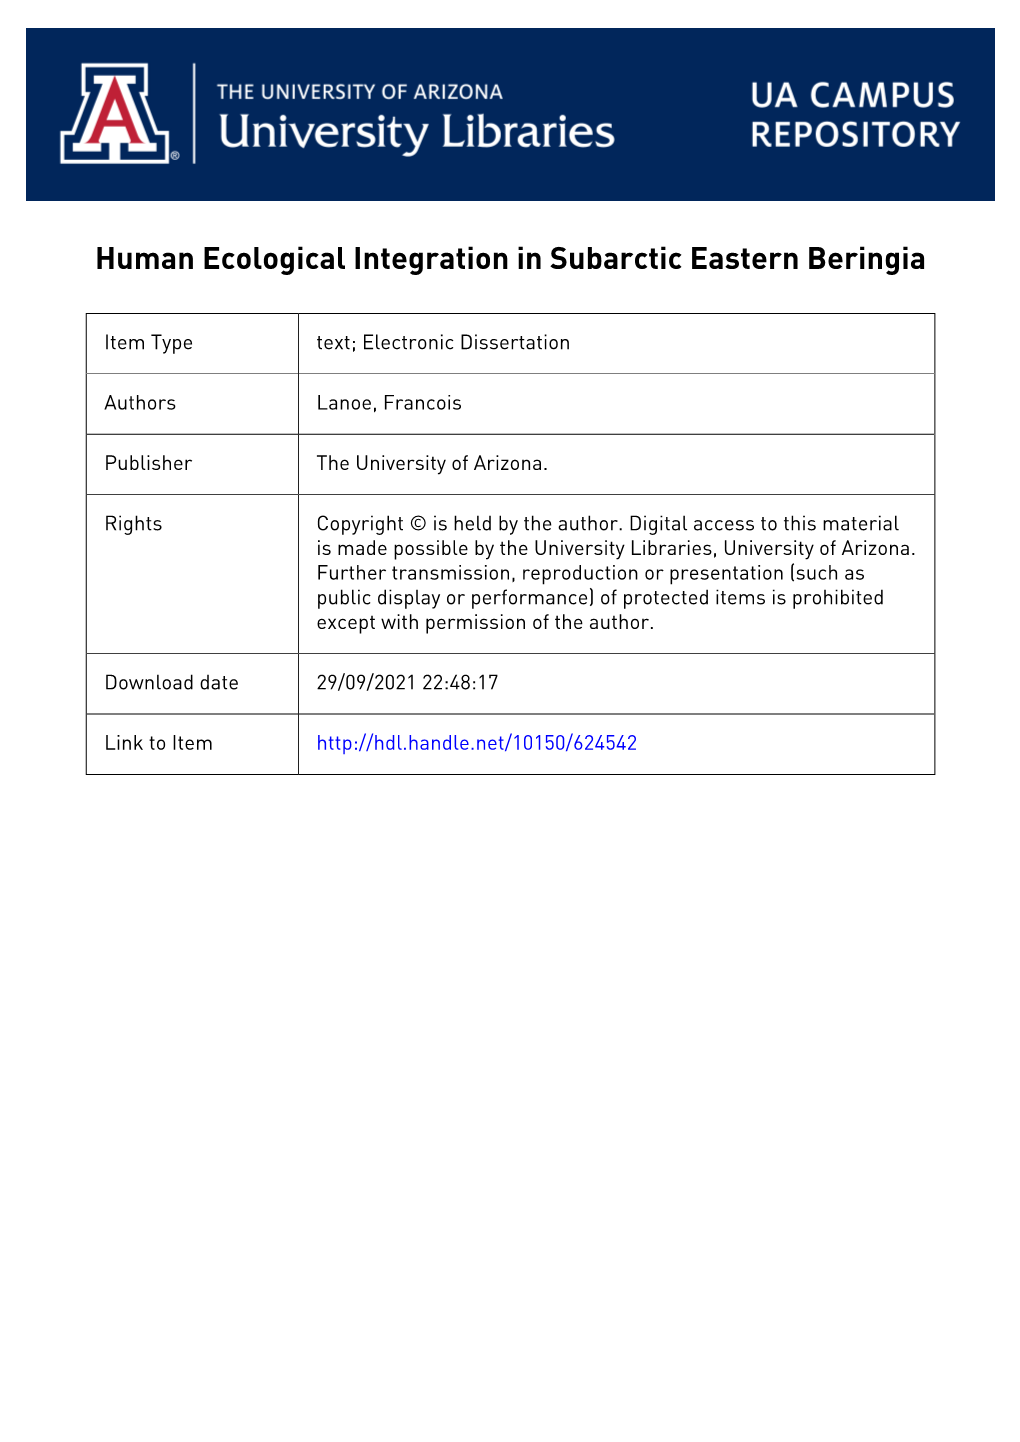 1 Human Ecological Integration in Subarctic